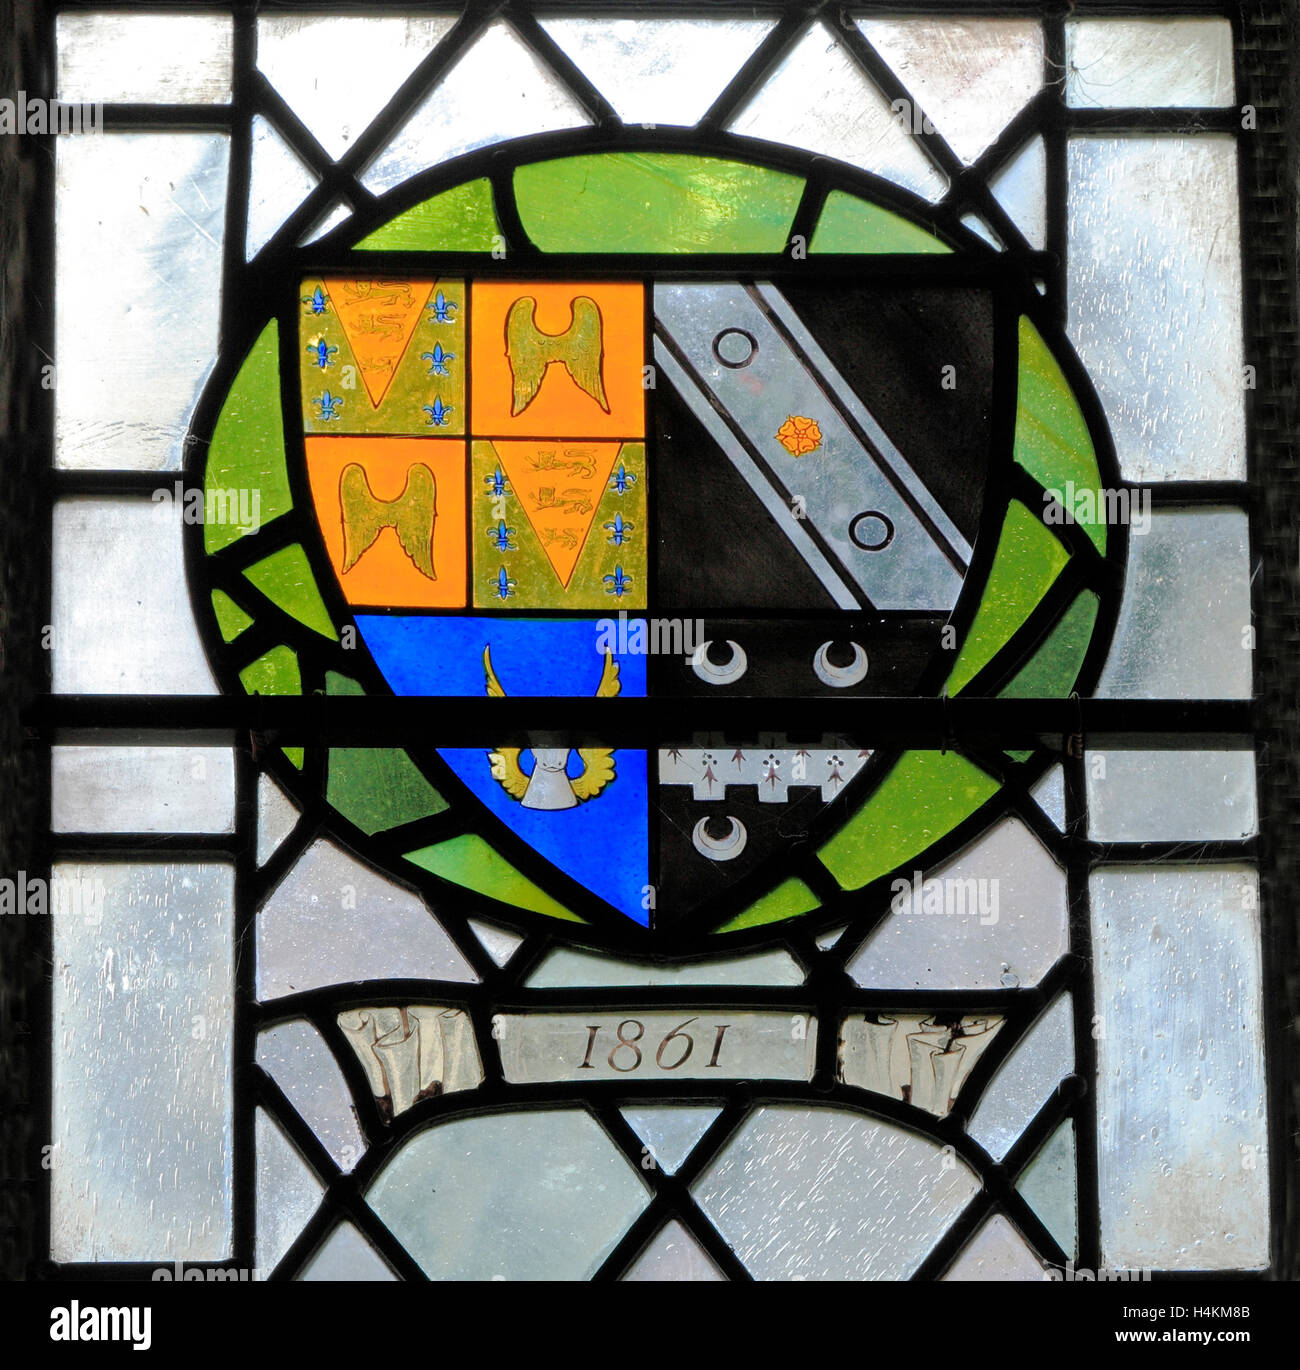 Stanhoe, Norfolk, Arms of George Henry Seymour  1861, quartered with Conway, Glover and Hoste families, heraldry, heraldic Stock Photo